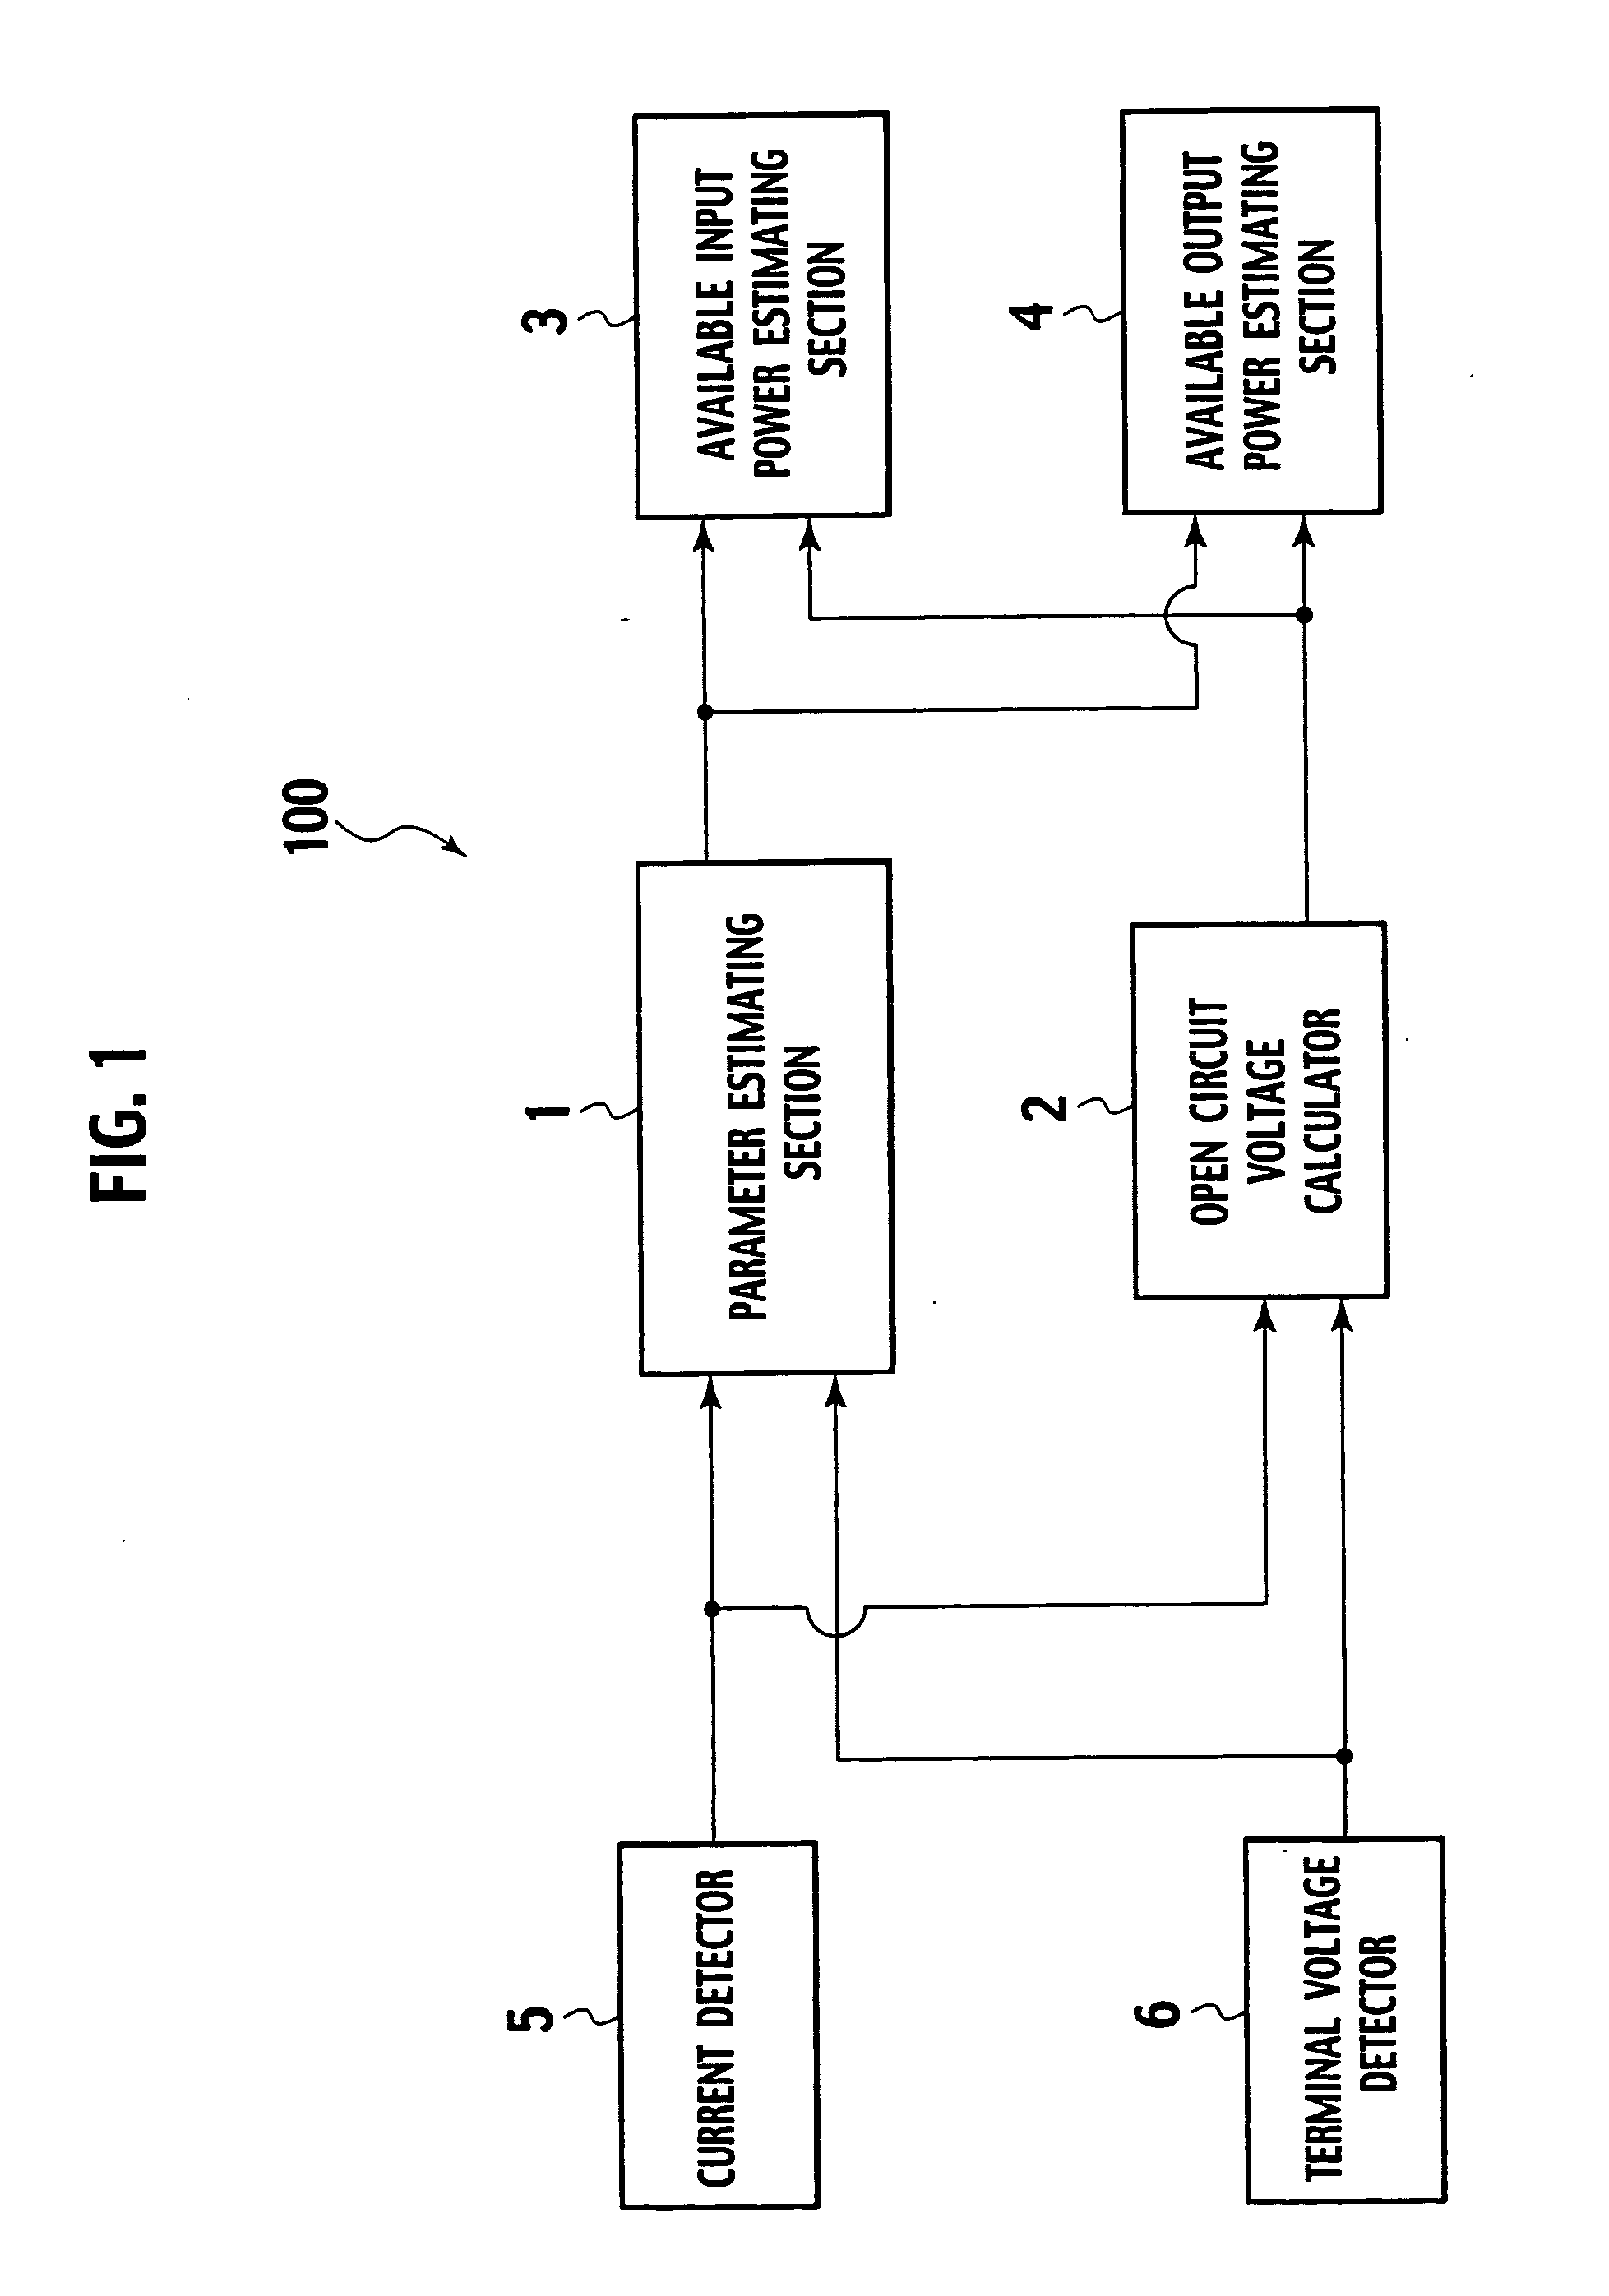 Available input-output power estimating device for secondary battery